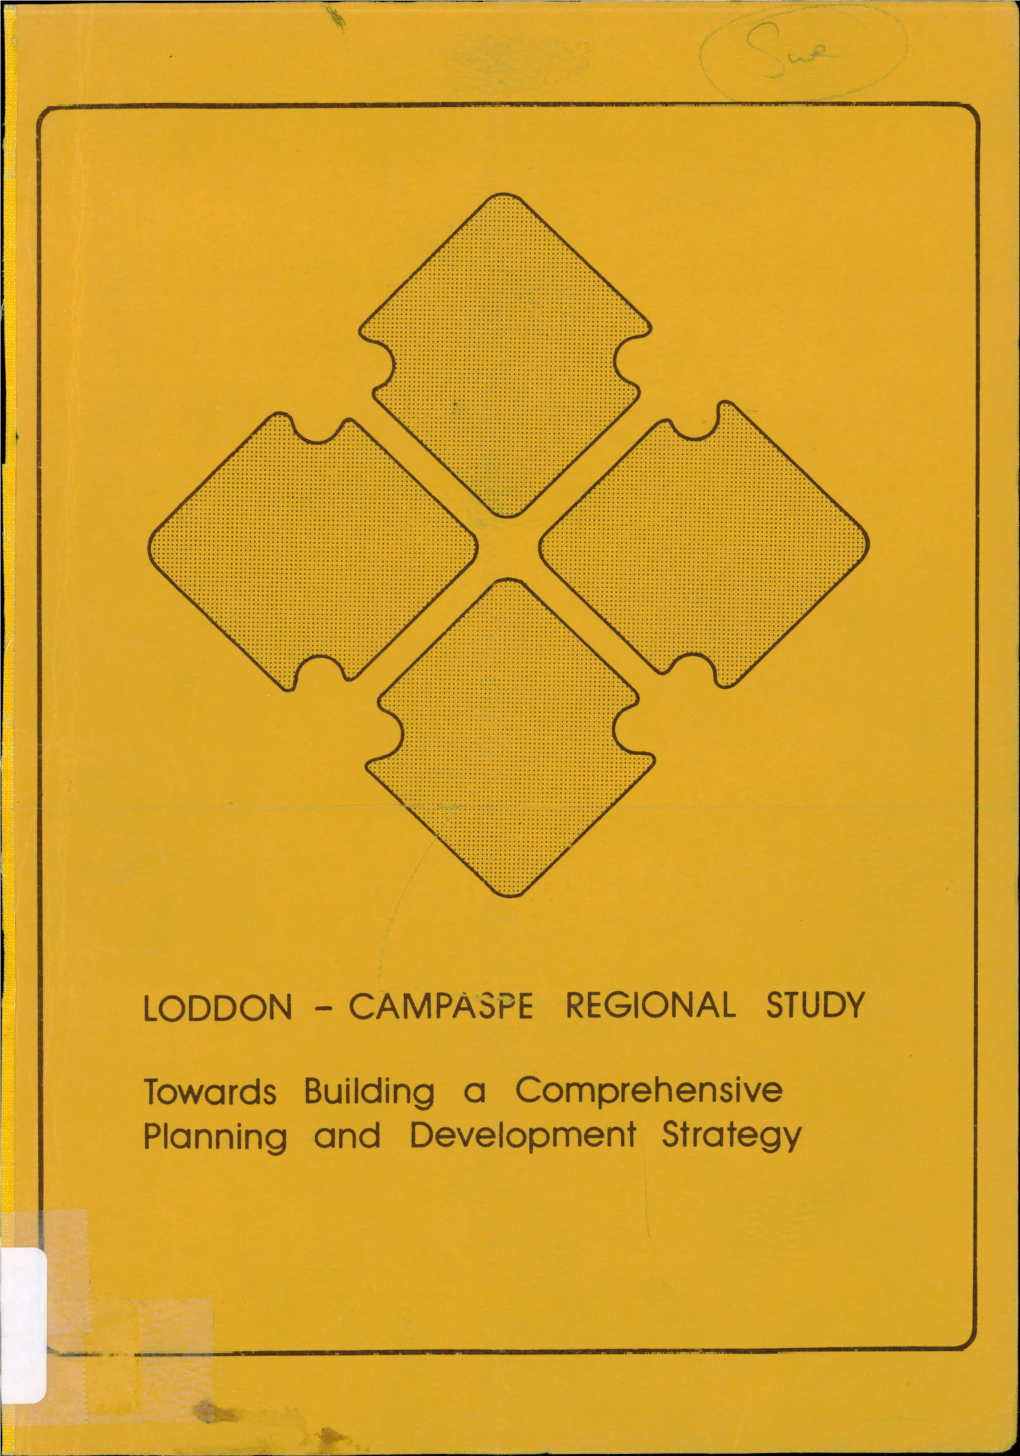 Towards Building a Comprehensive Planning and Development Strategy MPE LIBRARY